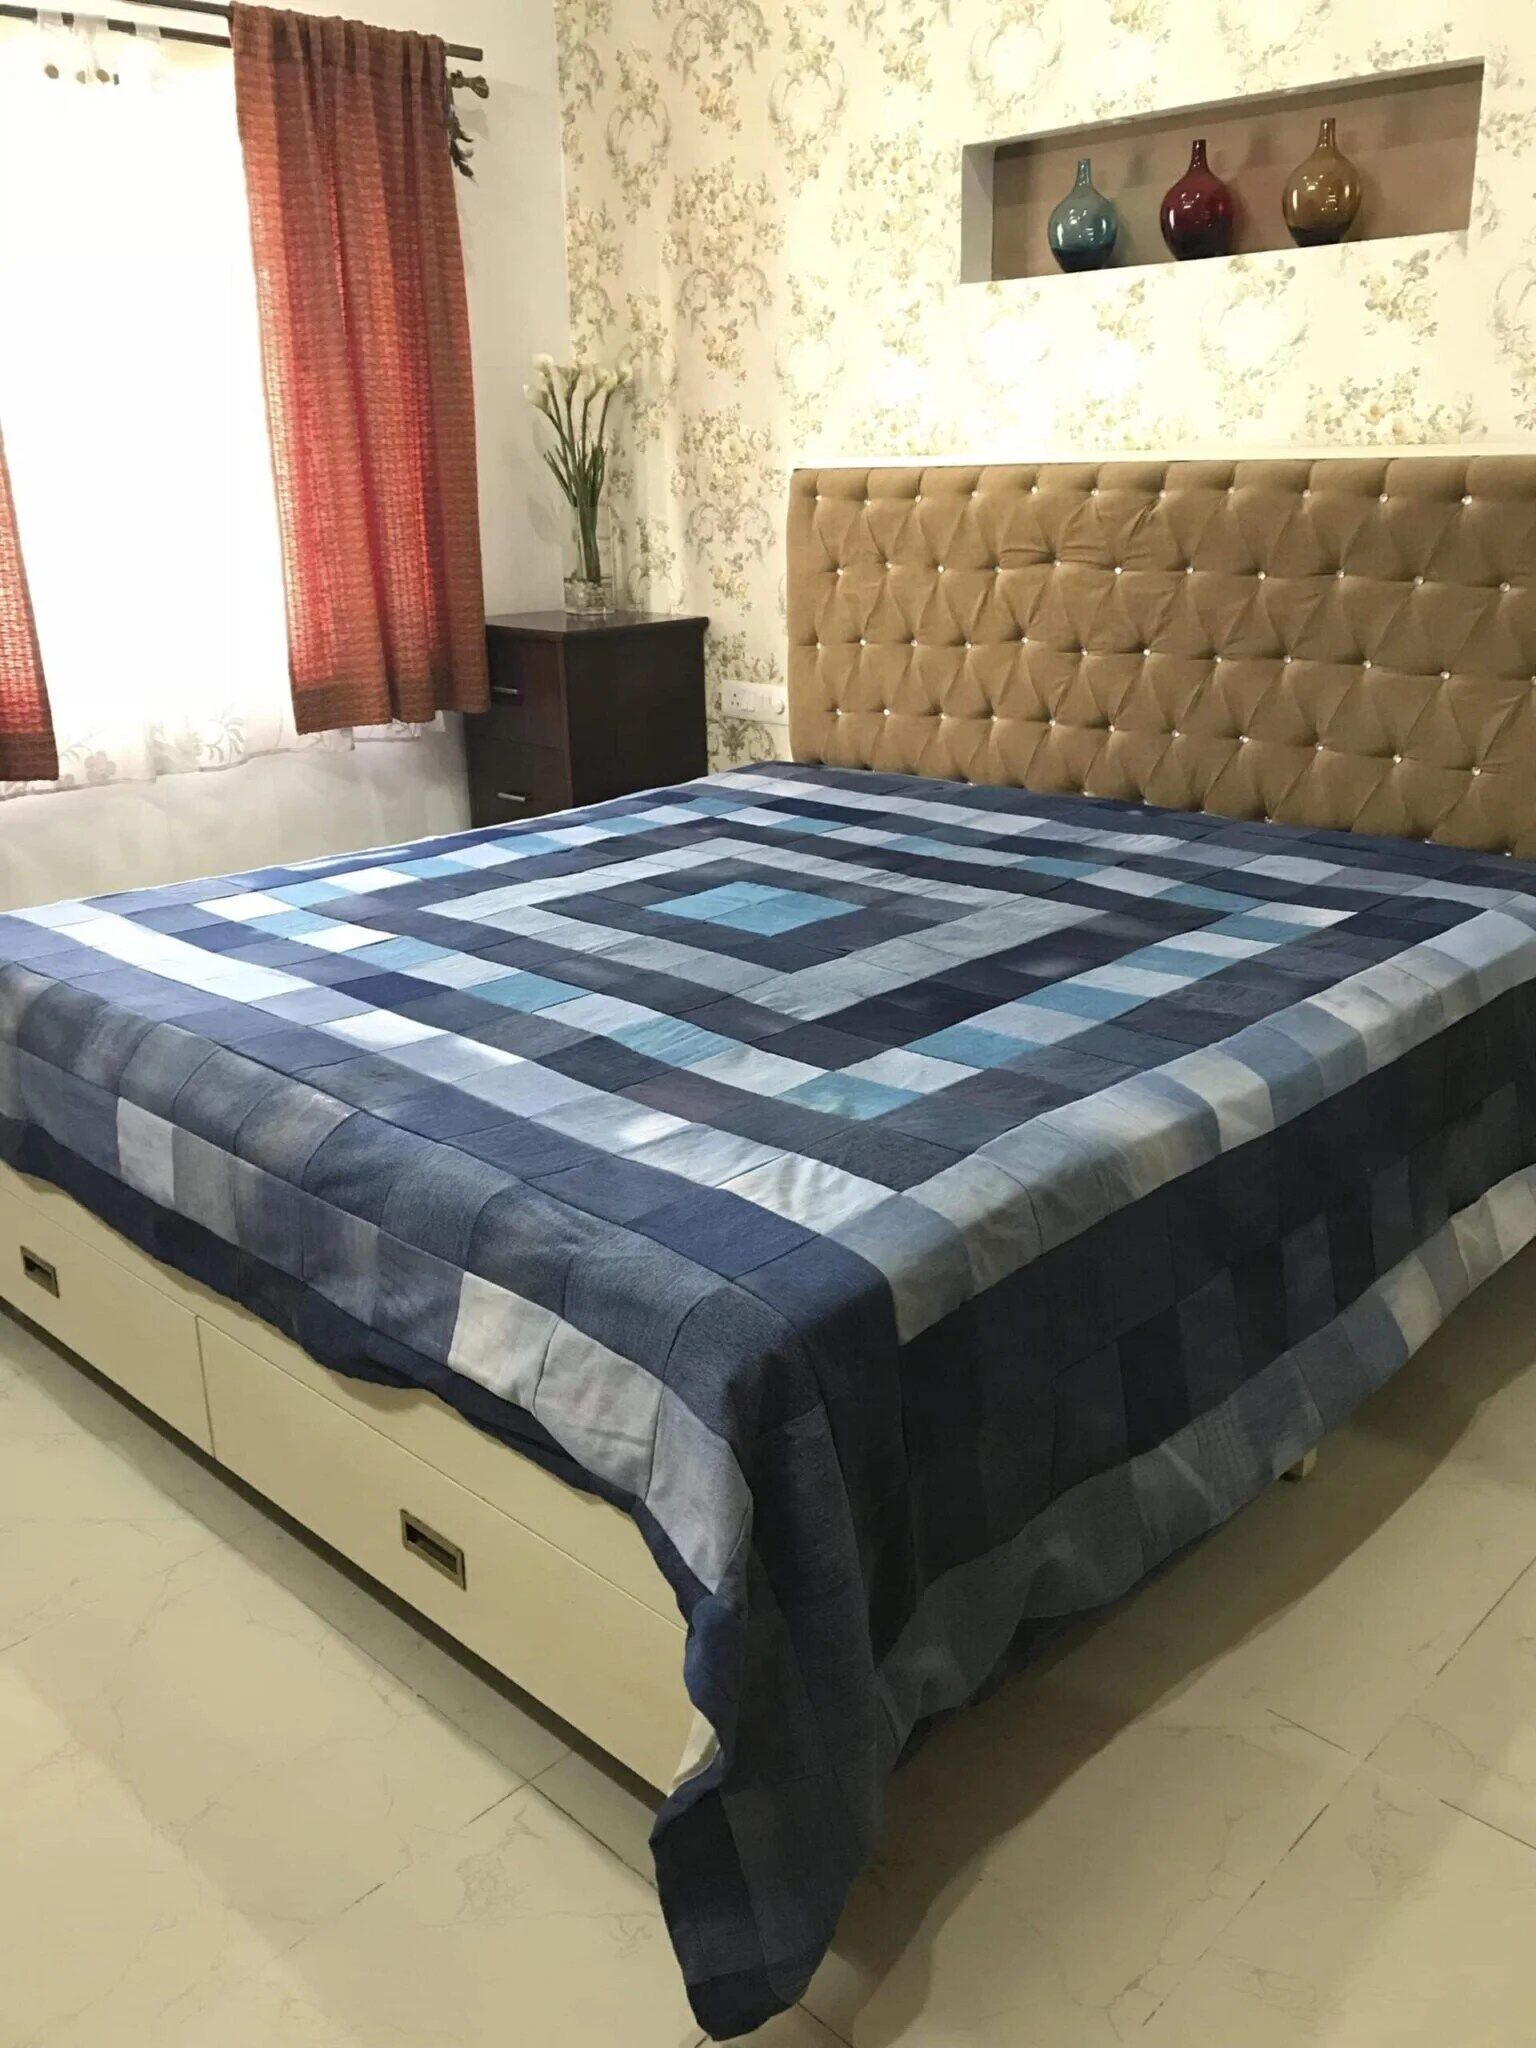 Checkered bed cover